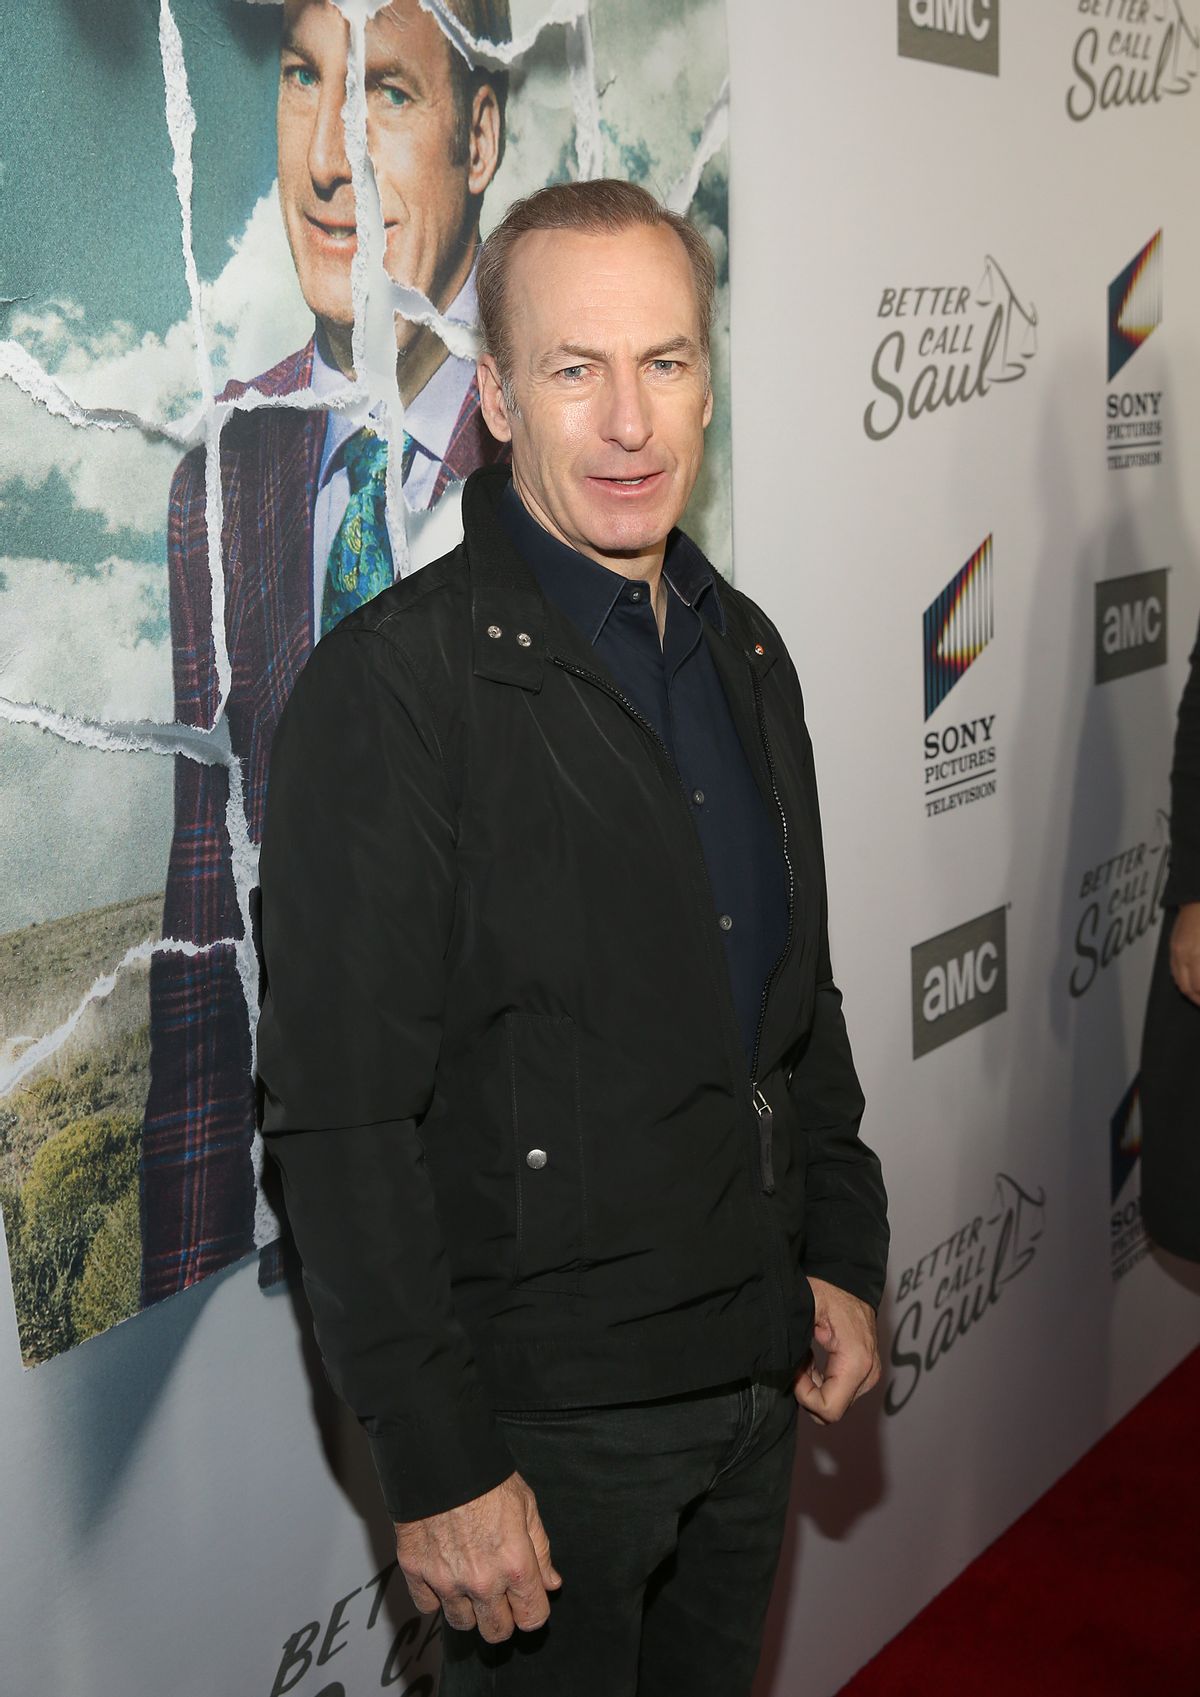 LOS ANGELES, CALIFORNIA - FEBRUARY 05: Bob Odenkirk attends the premiere of AMC's "Better Call Saul" Season 5 on February 05, 2020 in Los Angeles, California. (Photo by Jesse Grant/Getty Images for AMC) (Jesse Grant/Getty Images for AMC)